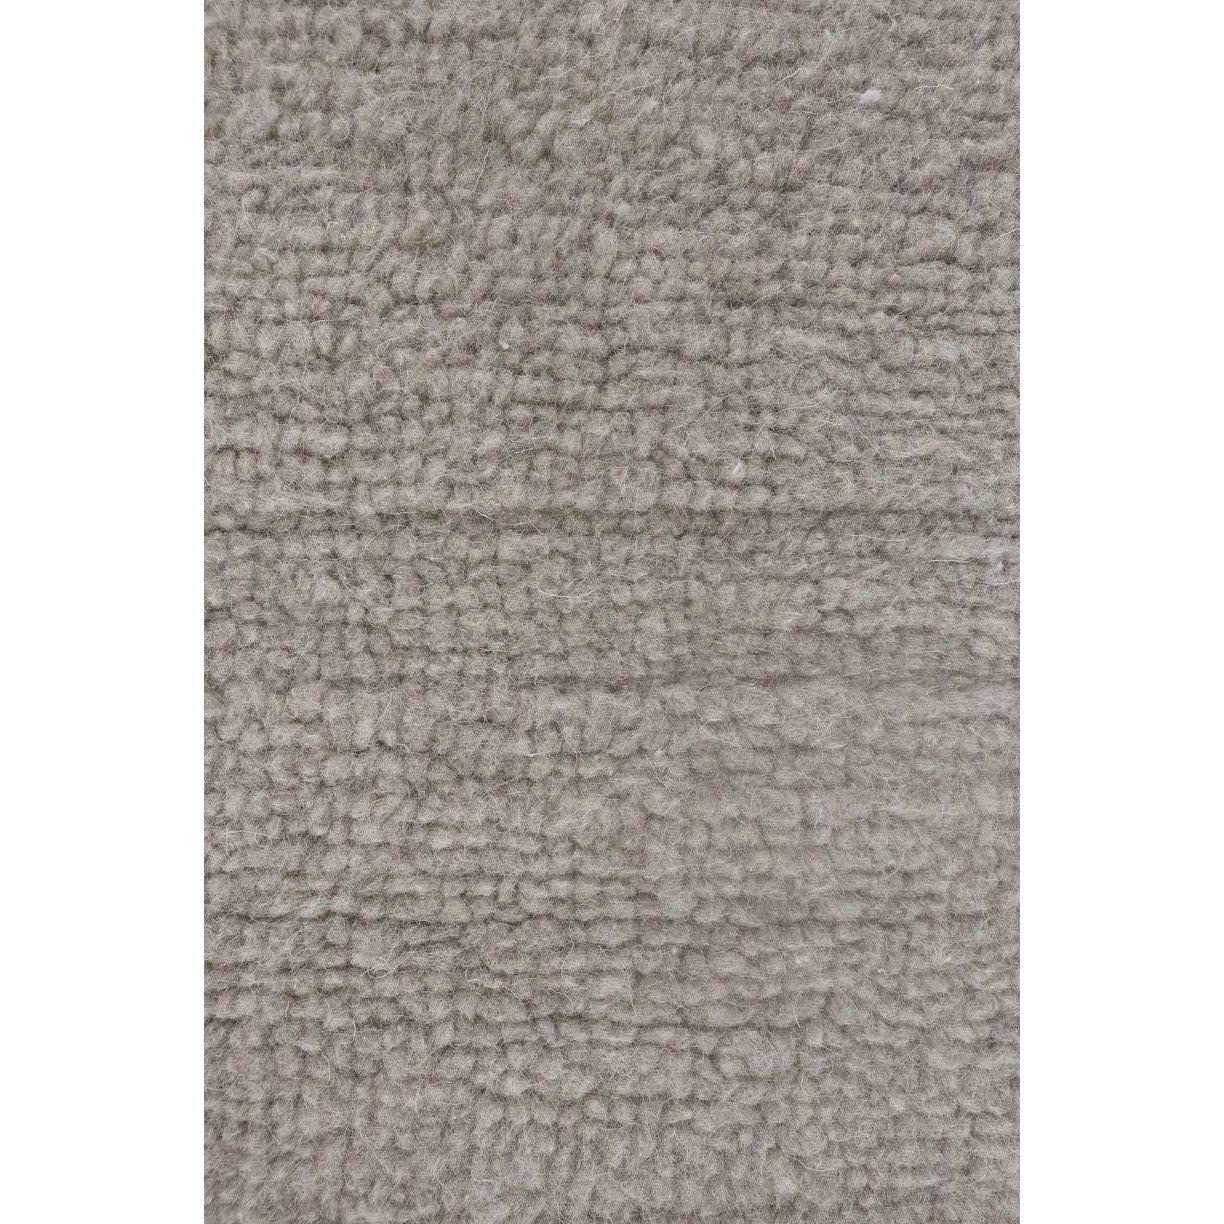 Lorena Canals Steppe Grey Woolable Area Rug